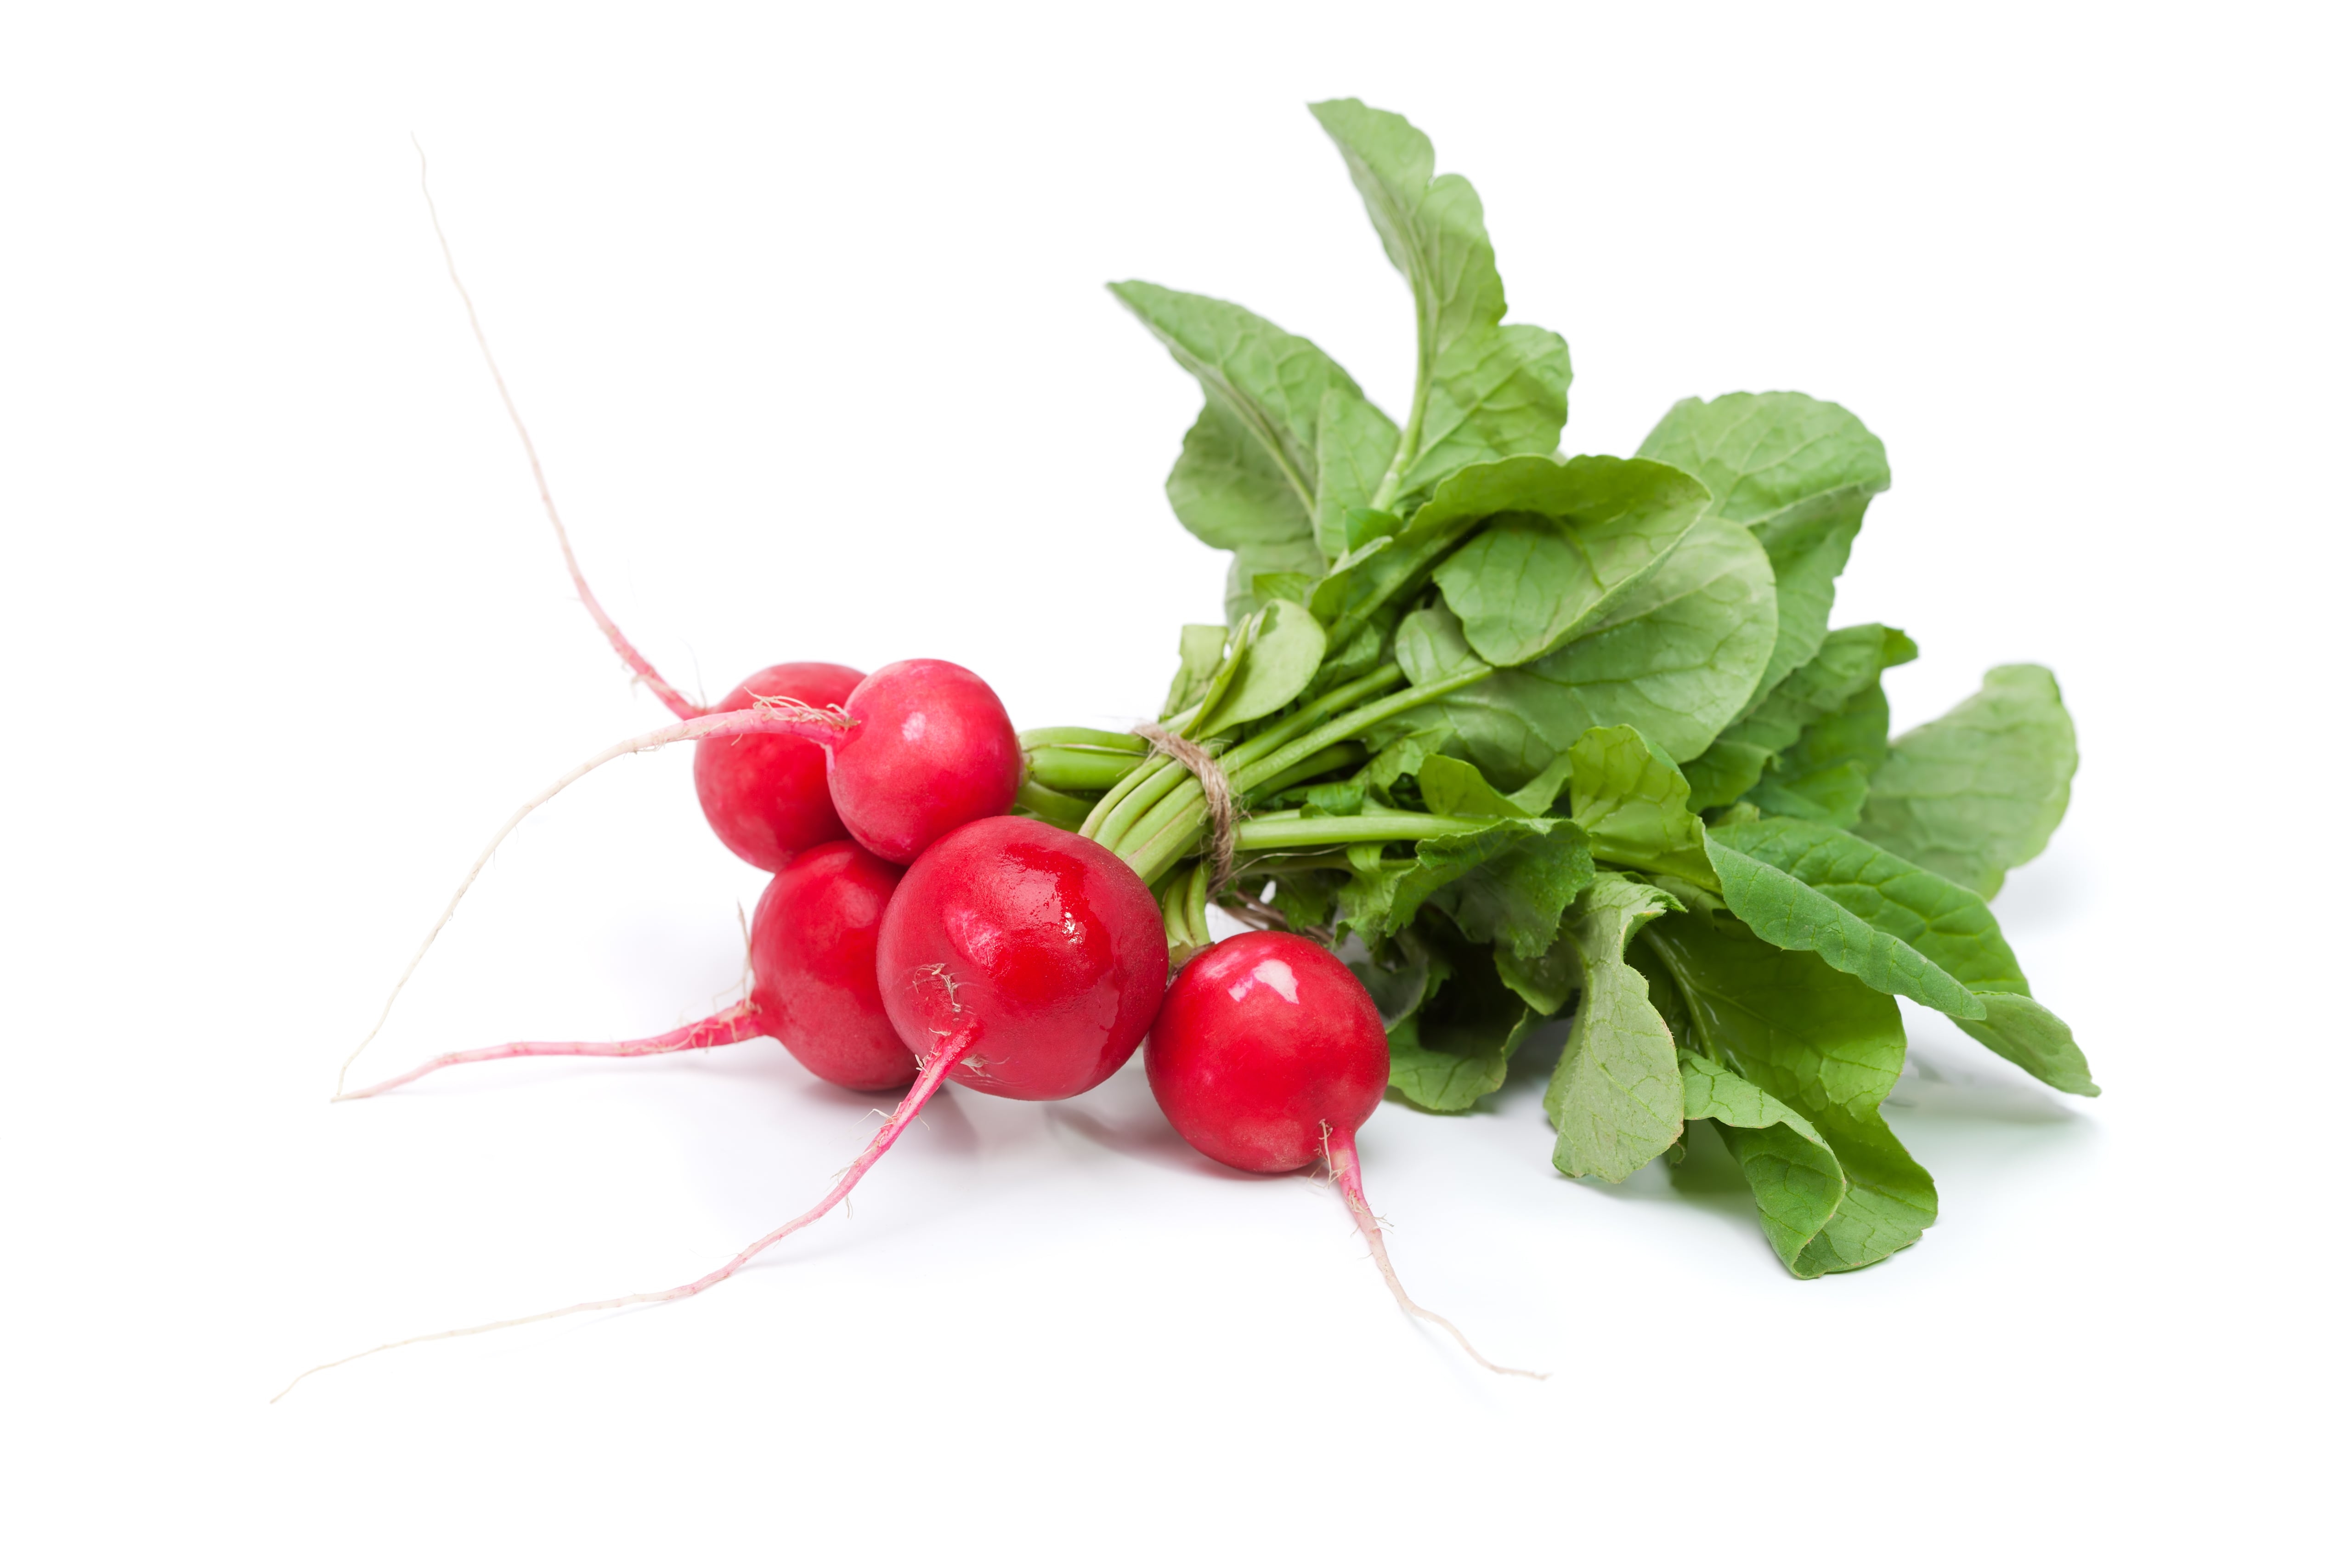 Market Fresh Finds: Radishes perfect for much more than garnish - The  Columbian